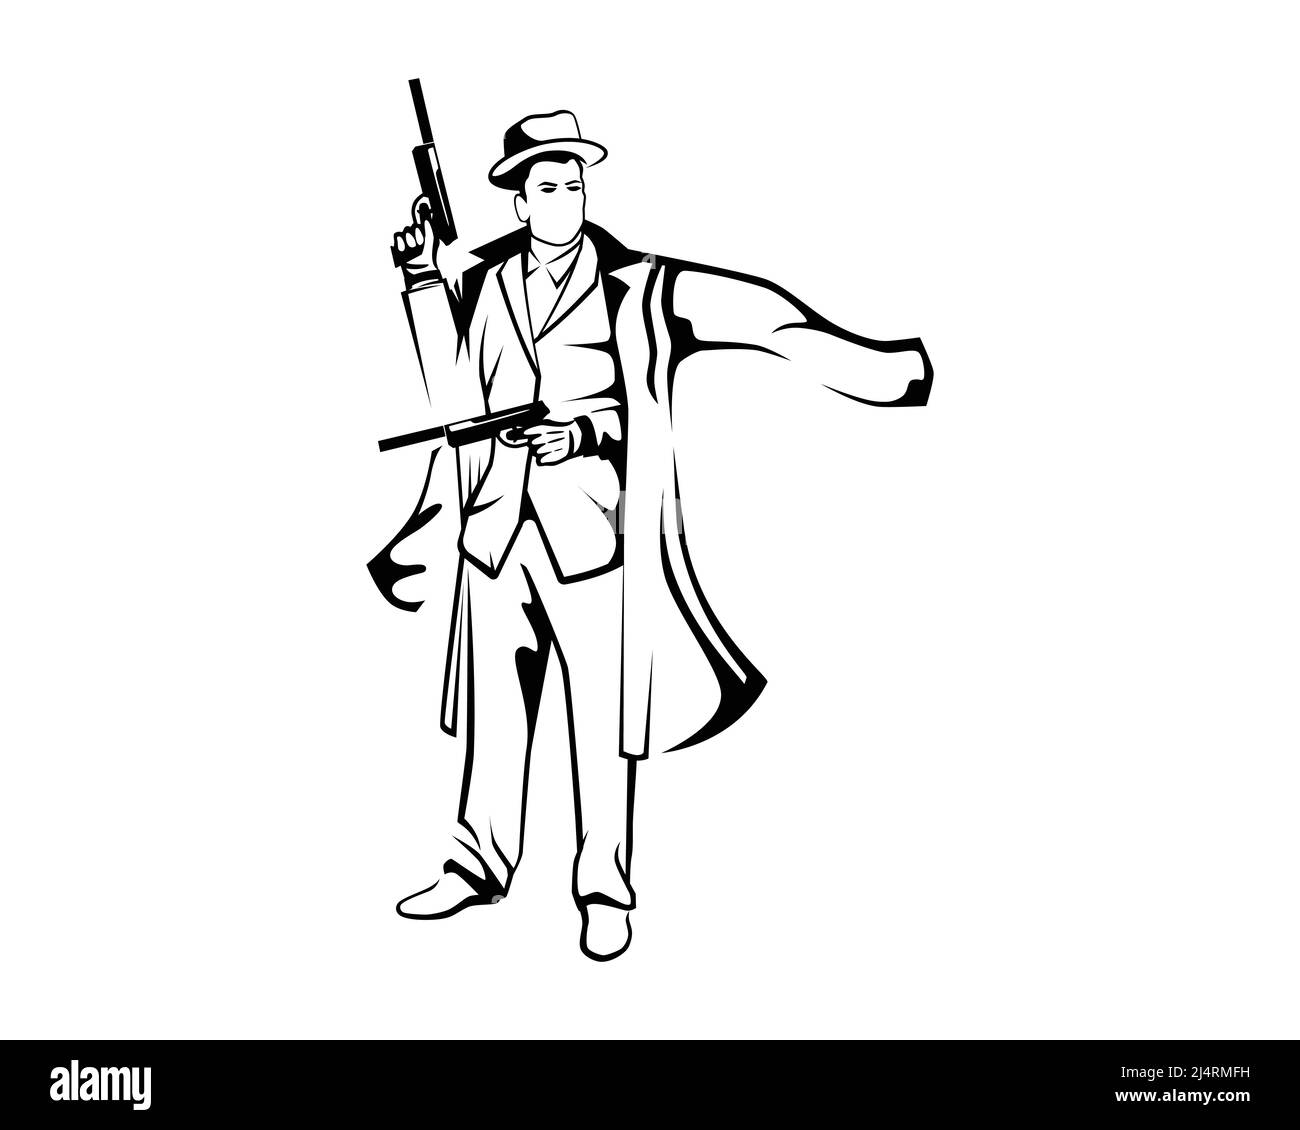 a Mafia Man's Holding Guns Illustration with Silhouette Style Vector Stock Vector